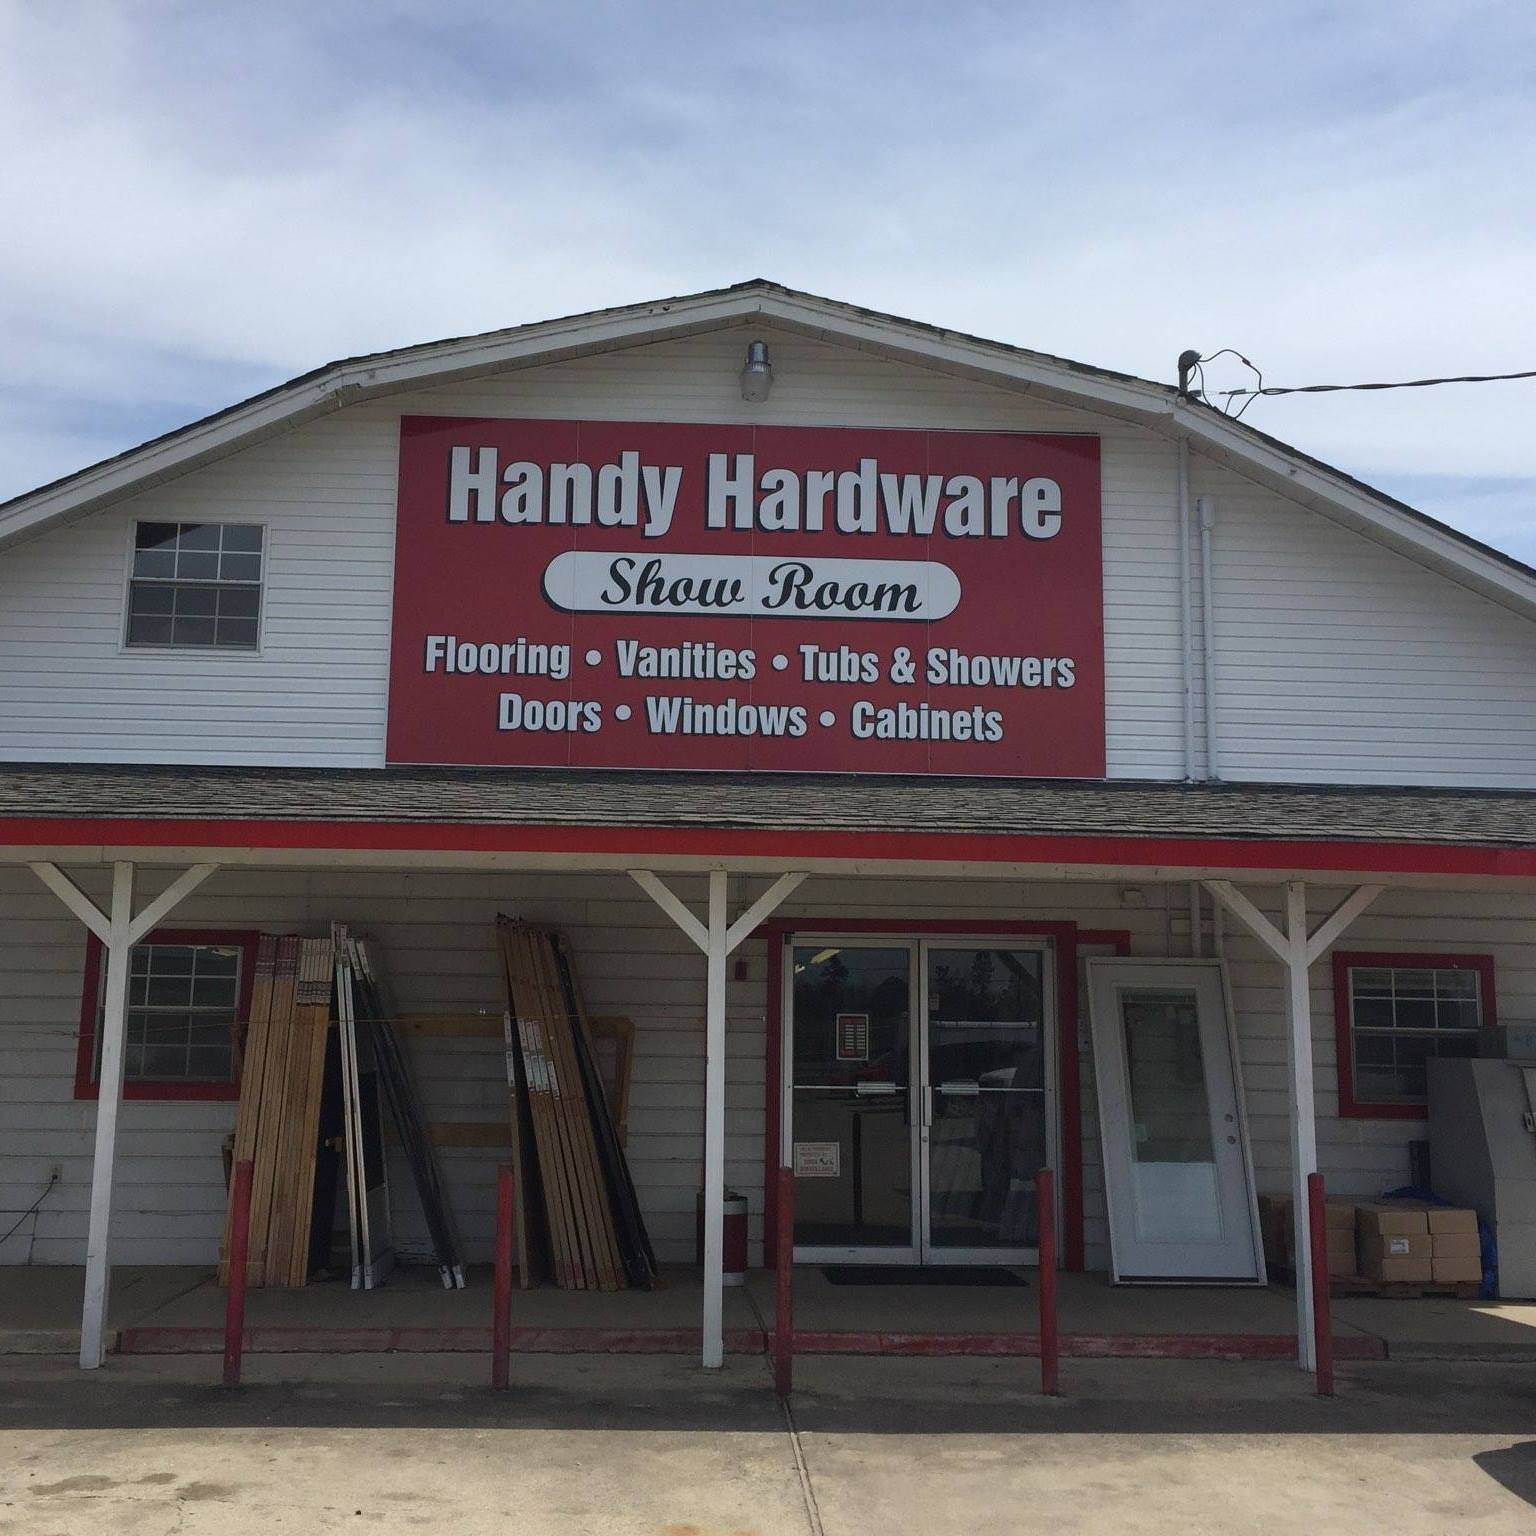 Handy Hardware at Dukes Junktion